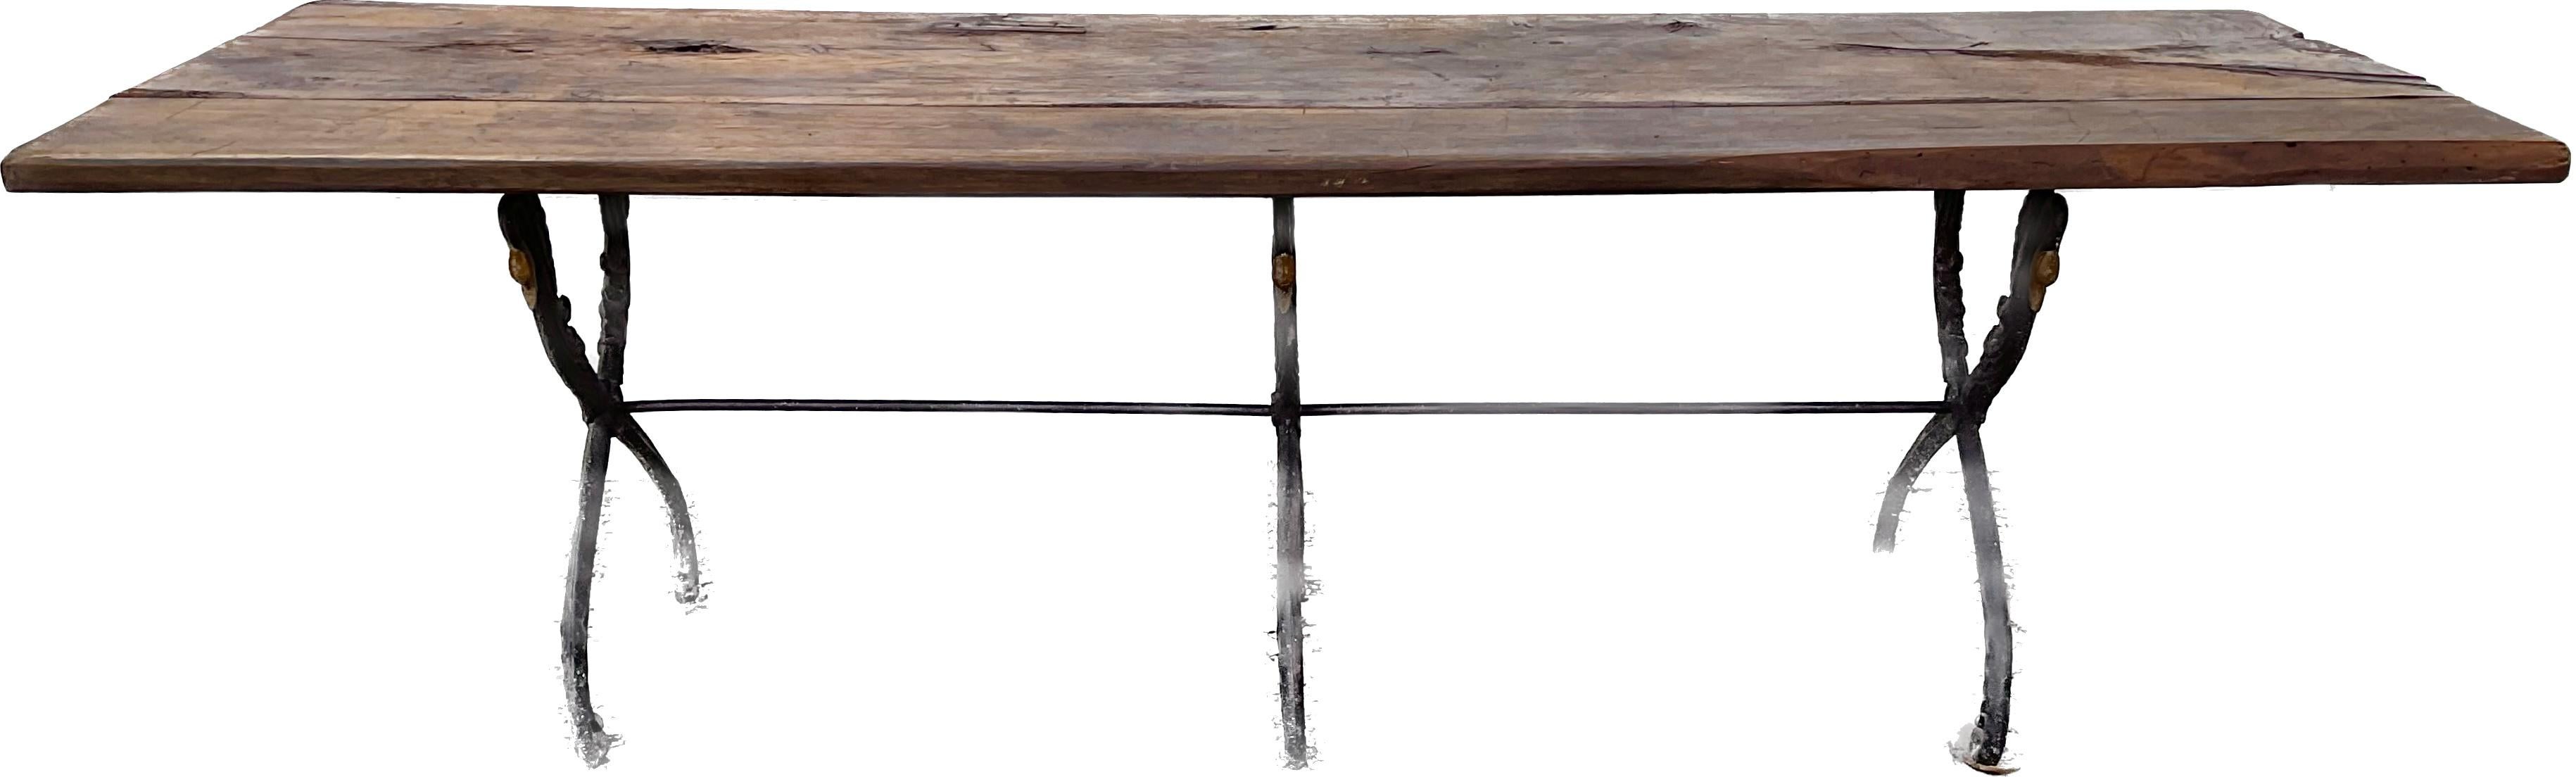 An elegant base depicting carved swans in old gilt paint and an extra-long well-proportioned top, make this versatile table wonderful for dining, as a sofa table, center table or as a desk with lots of room. The thick walnut wooden top appears older